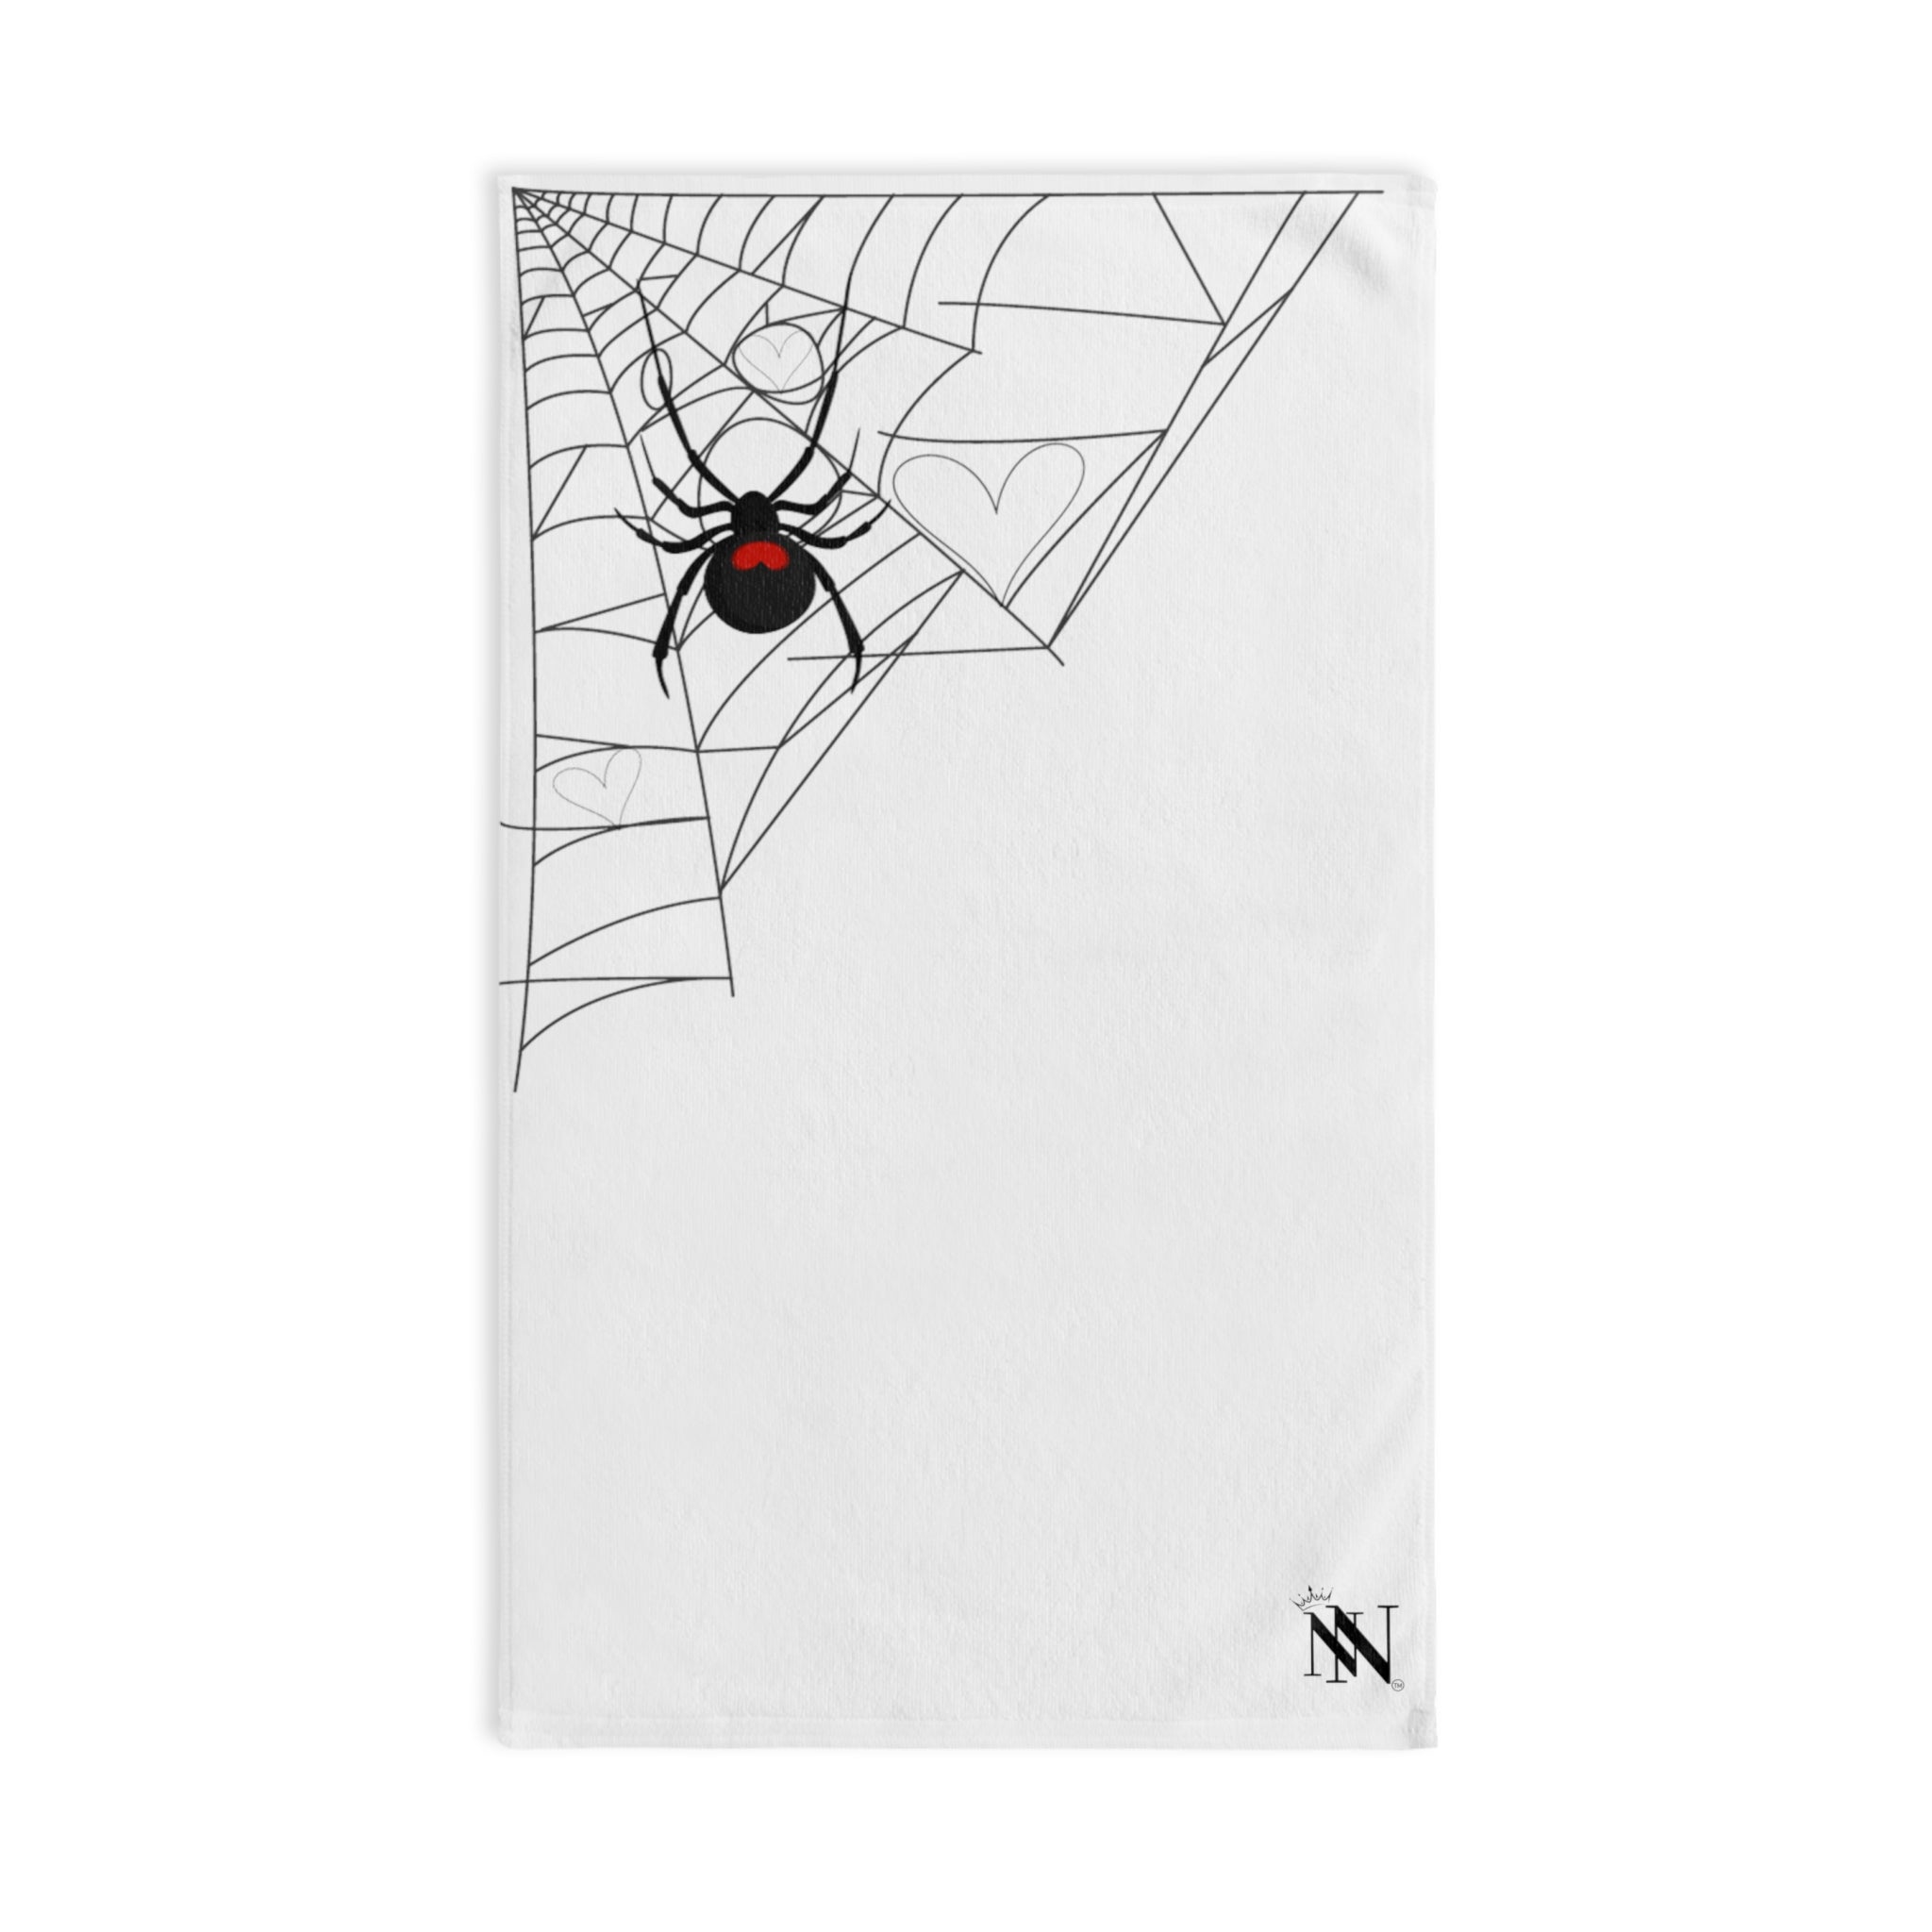 Black Widow White | Funny Gifts for Men - Gifts for Him - Birthday Gifts for Men, Him, Her, Husband, Boyfriend, Girlfriend, New Couple Gifts, Fathers & Valentines Day Gifts, Christmas Gifts NECTAR NAPKINS